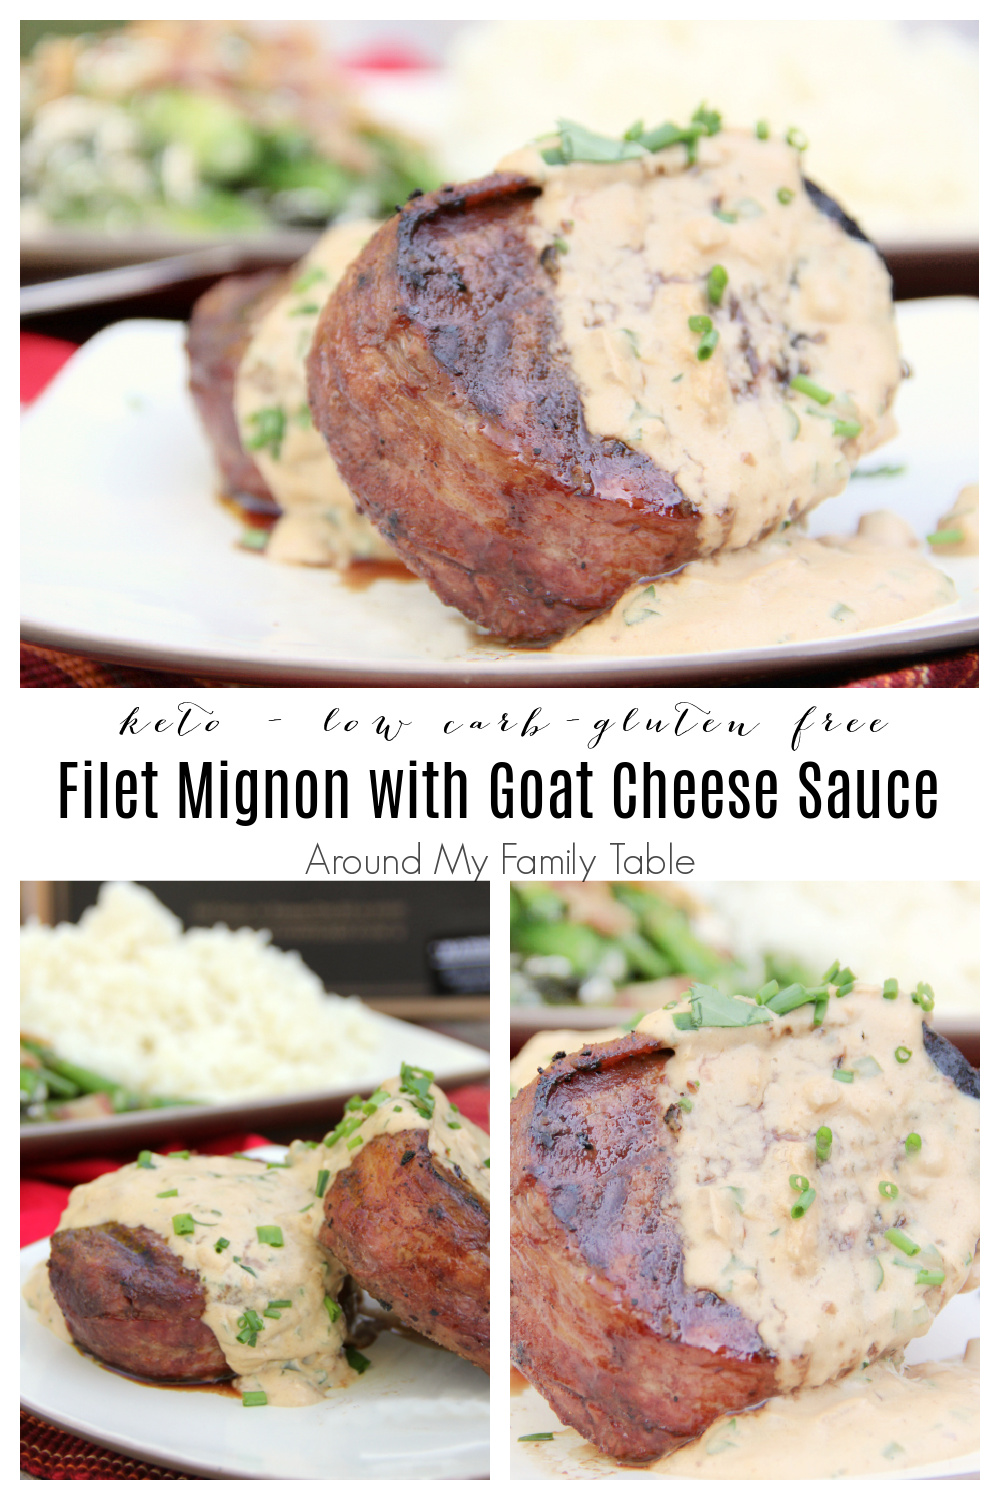 Celebrate any day with a delicious filet mignon drizzled with a rich goat cheese sauce for a truly decadent meal that's keto and low carb friendly. via @slingmama